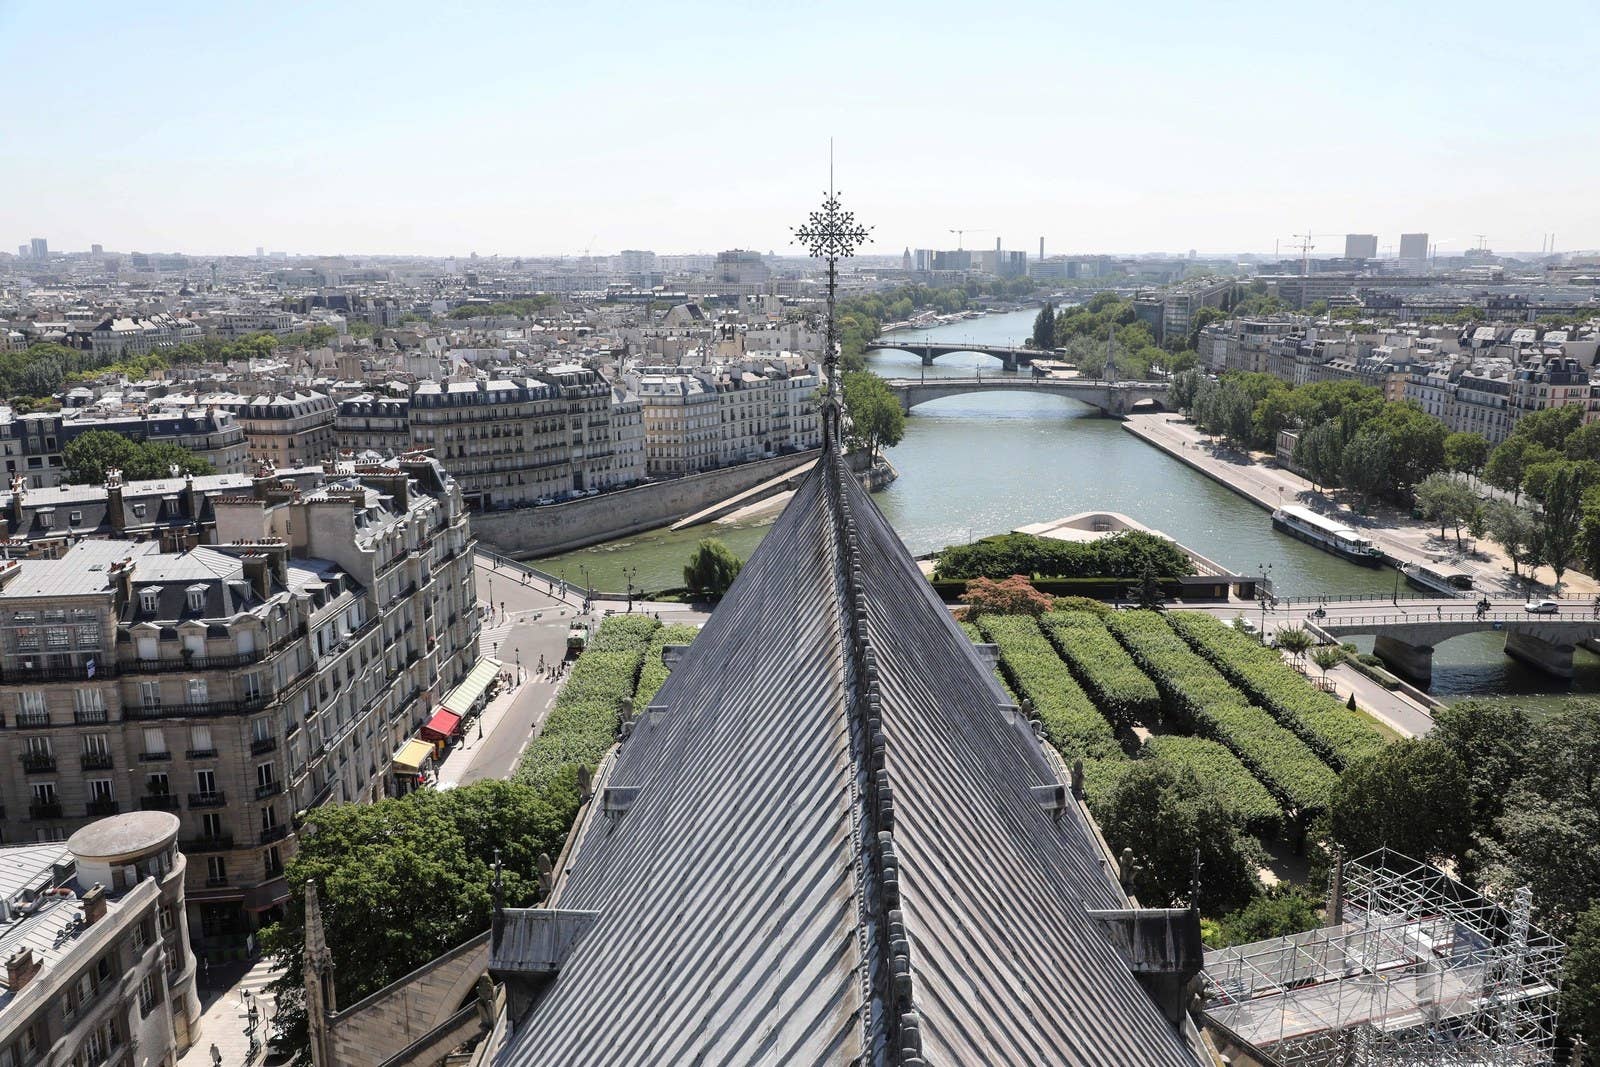 Notre-Dame de Paris Cathedral with a general view of the Seine river and its surroundings, June 26, 2018.